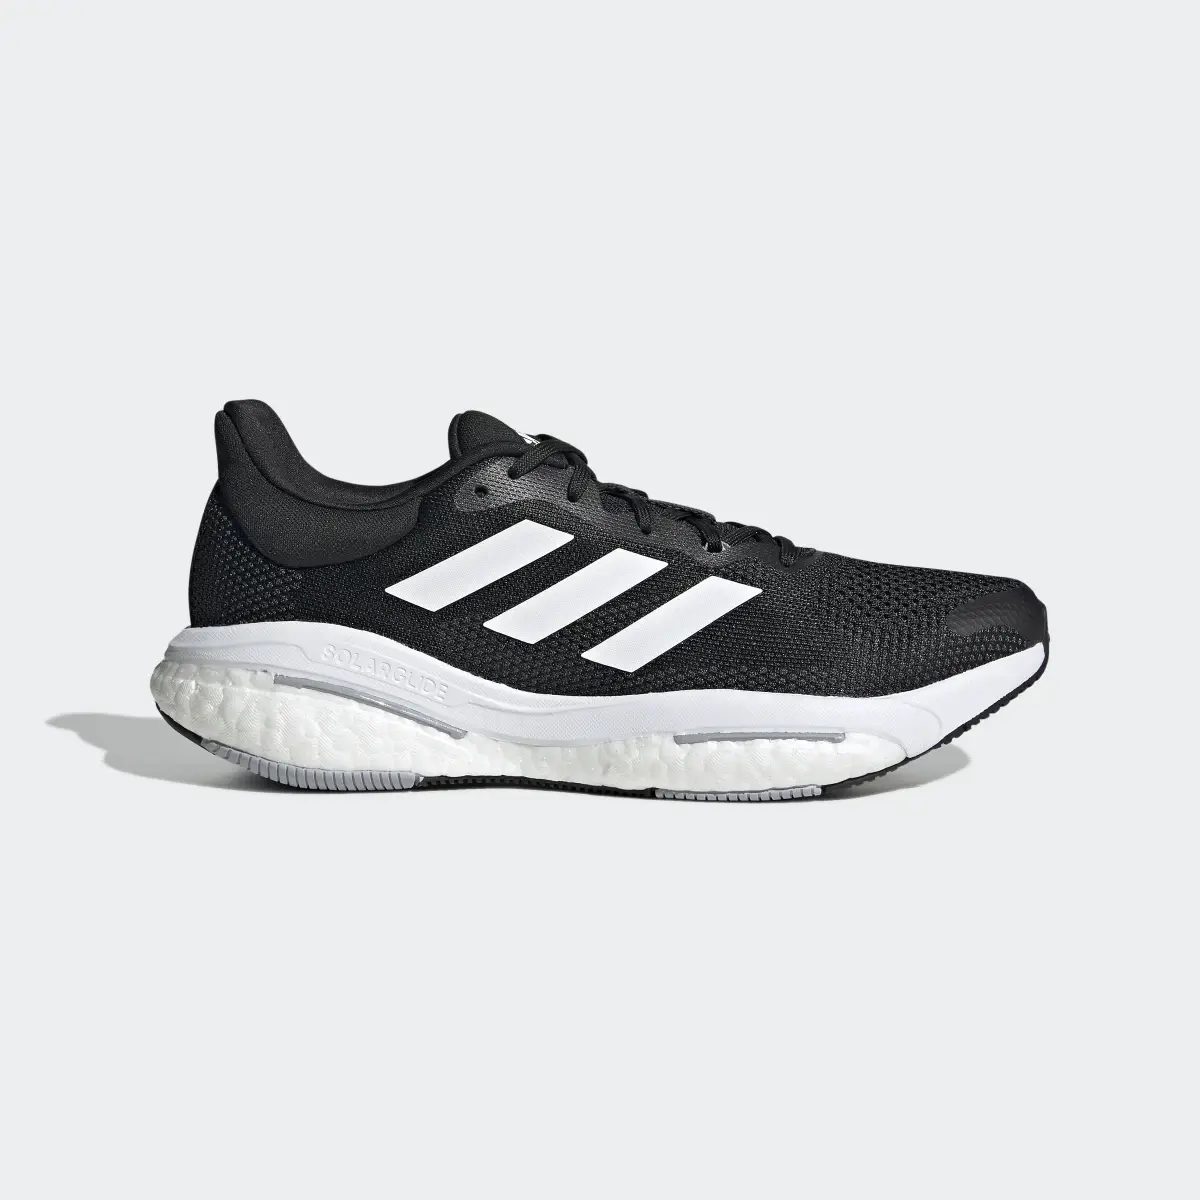 Adidas Solar Glide 5 Shoes Wide. 2